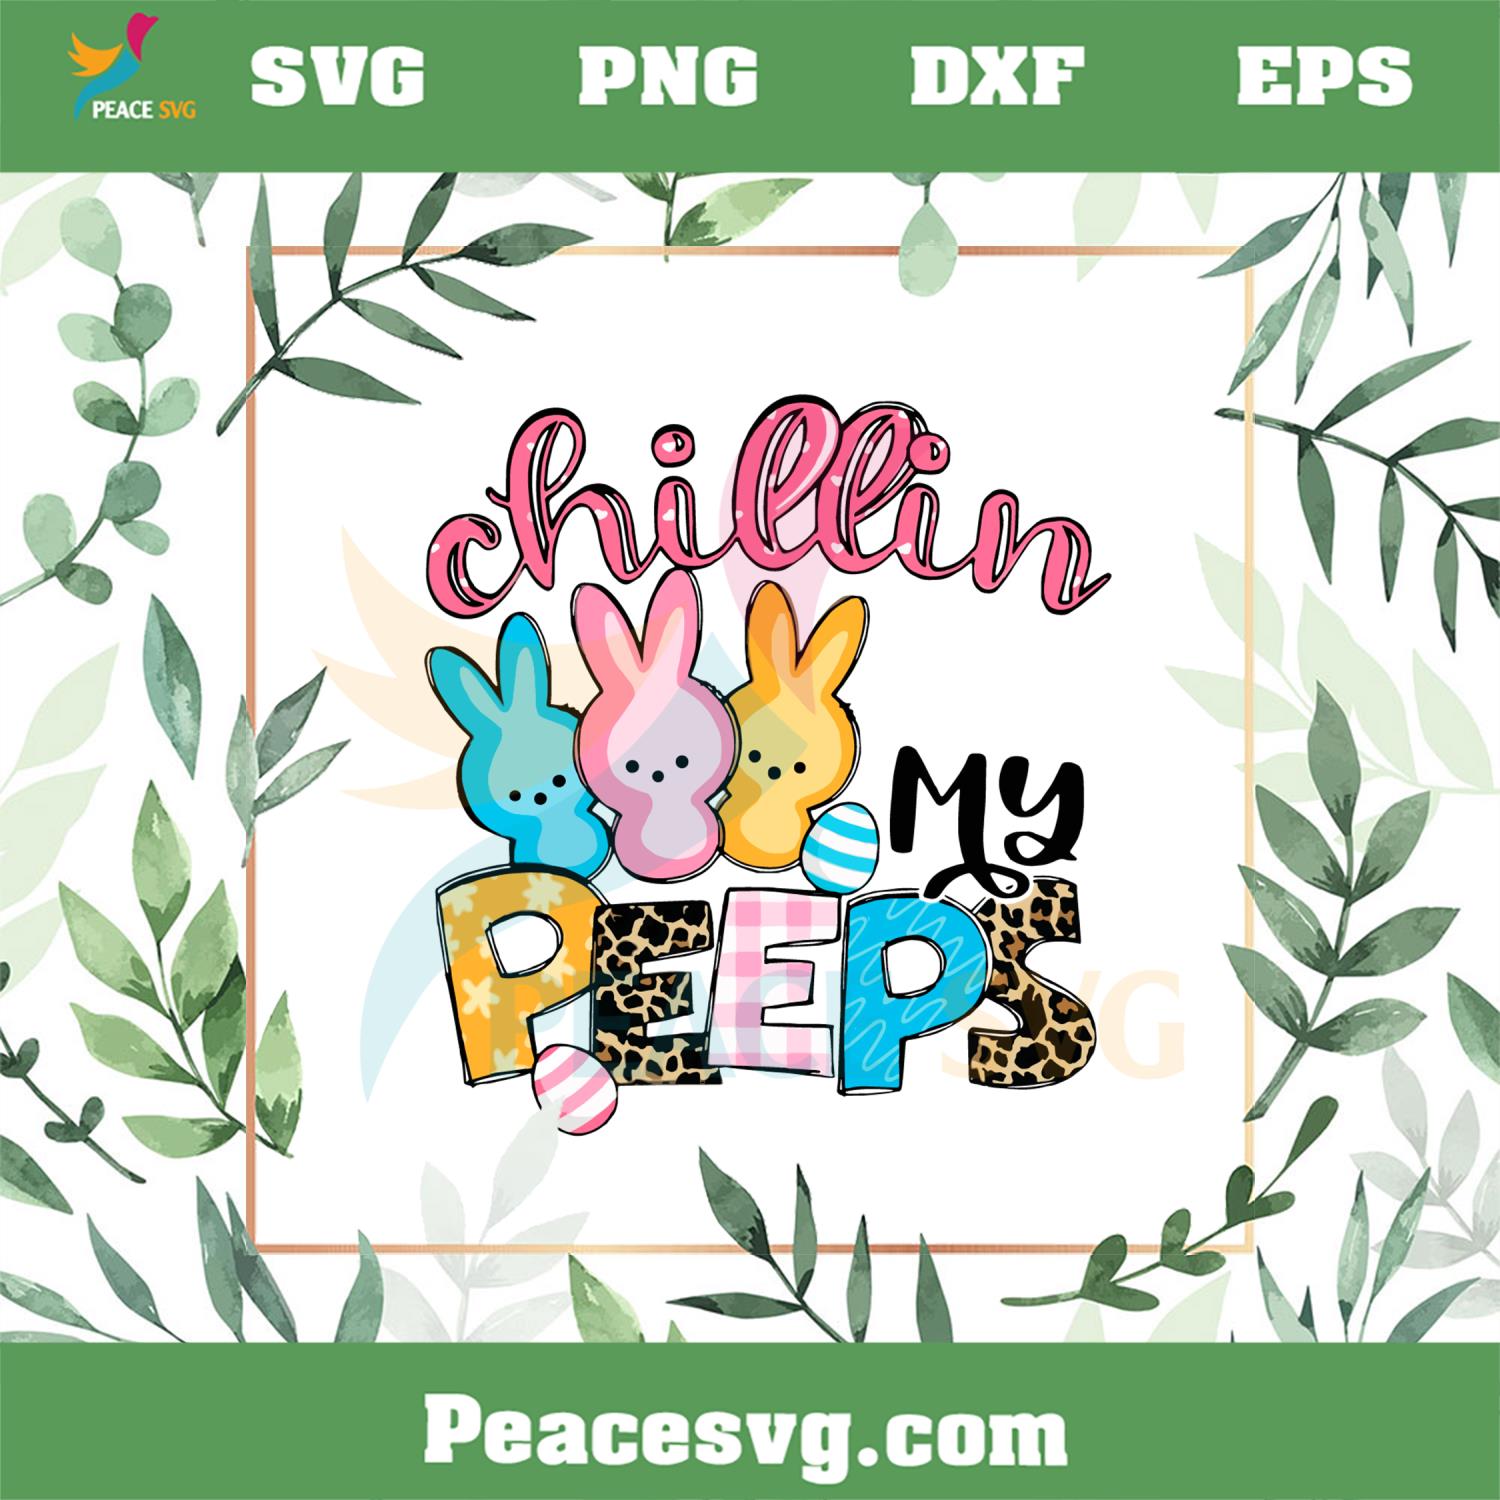 Chillin with my Peeps Funny Easter Peeps SVG Graphic Designs Files